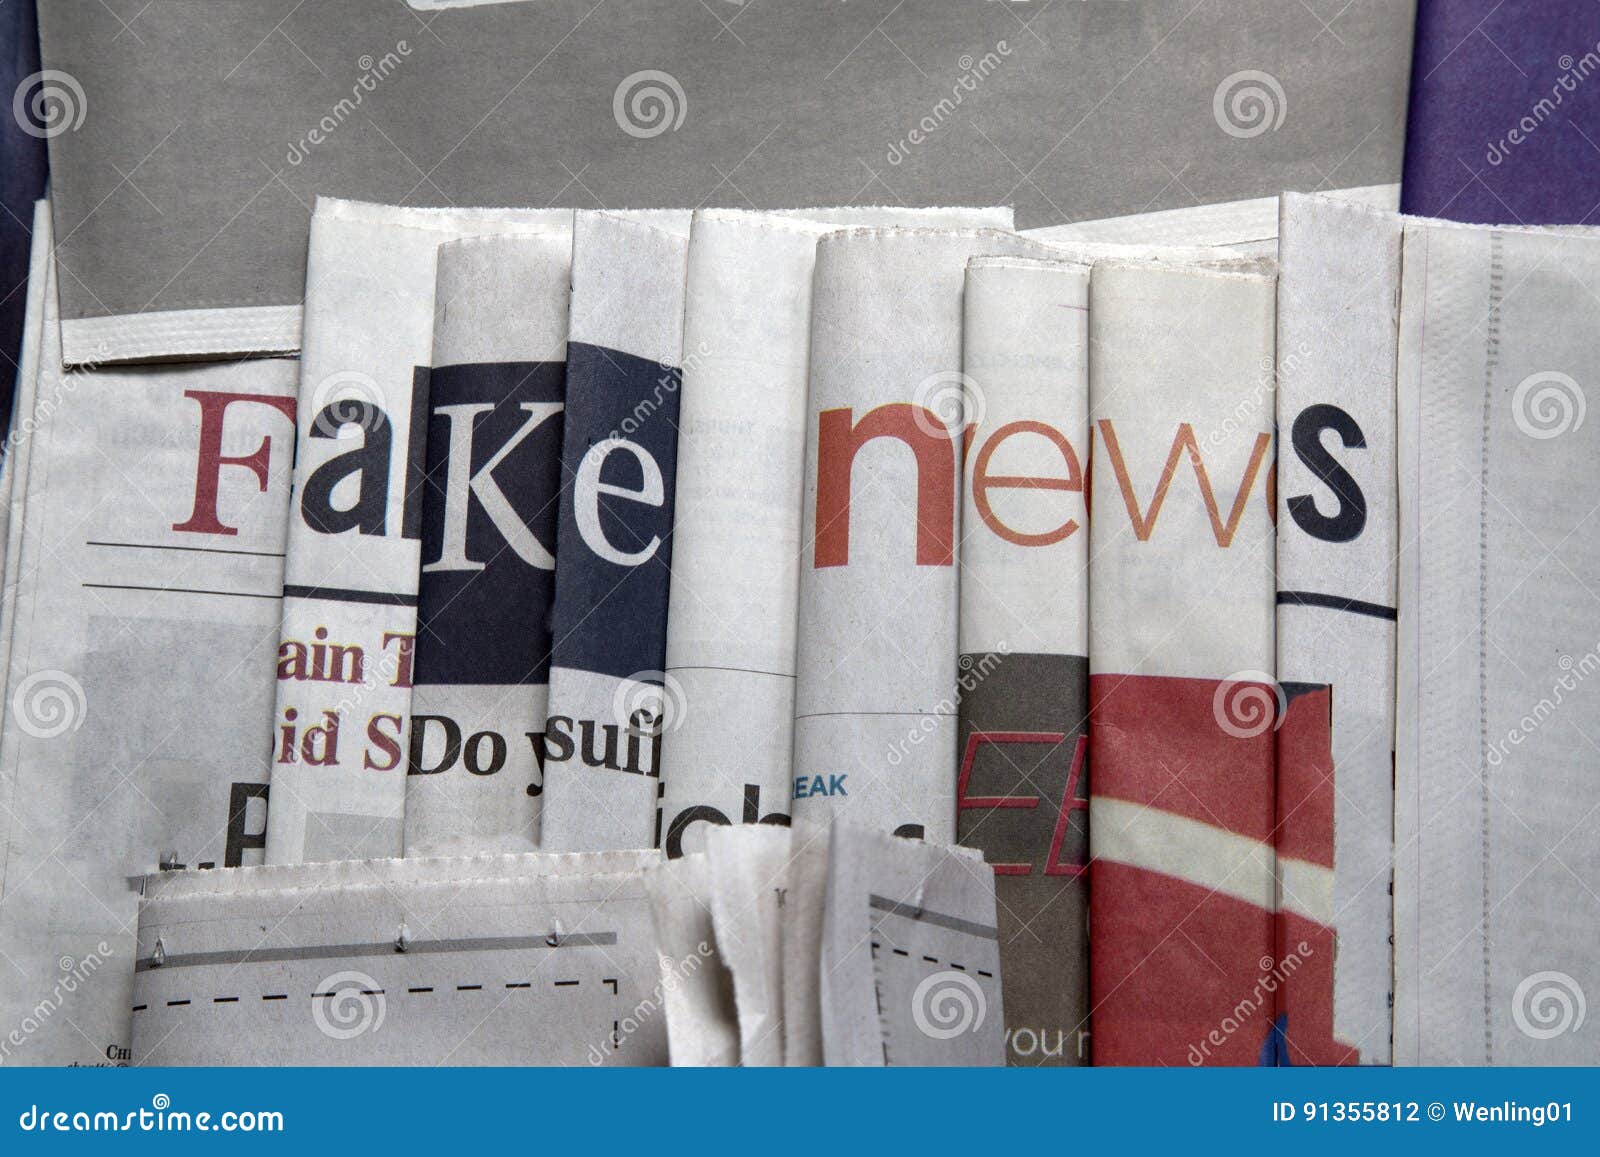 fake news on newspapers background